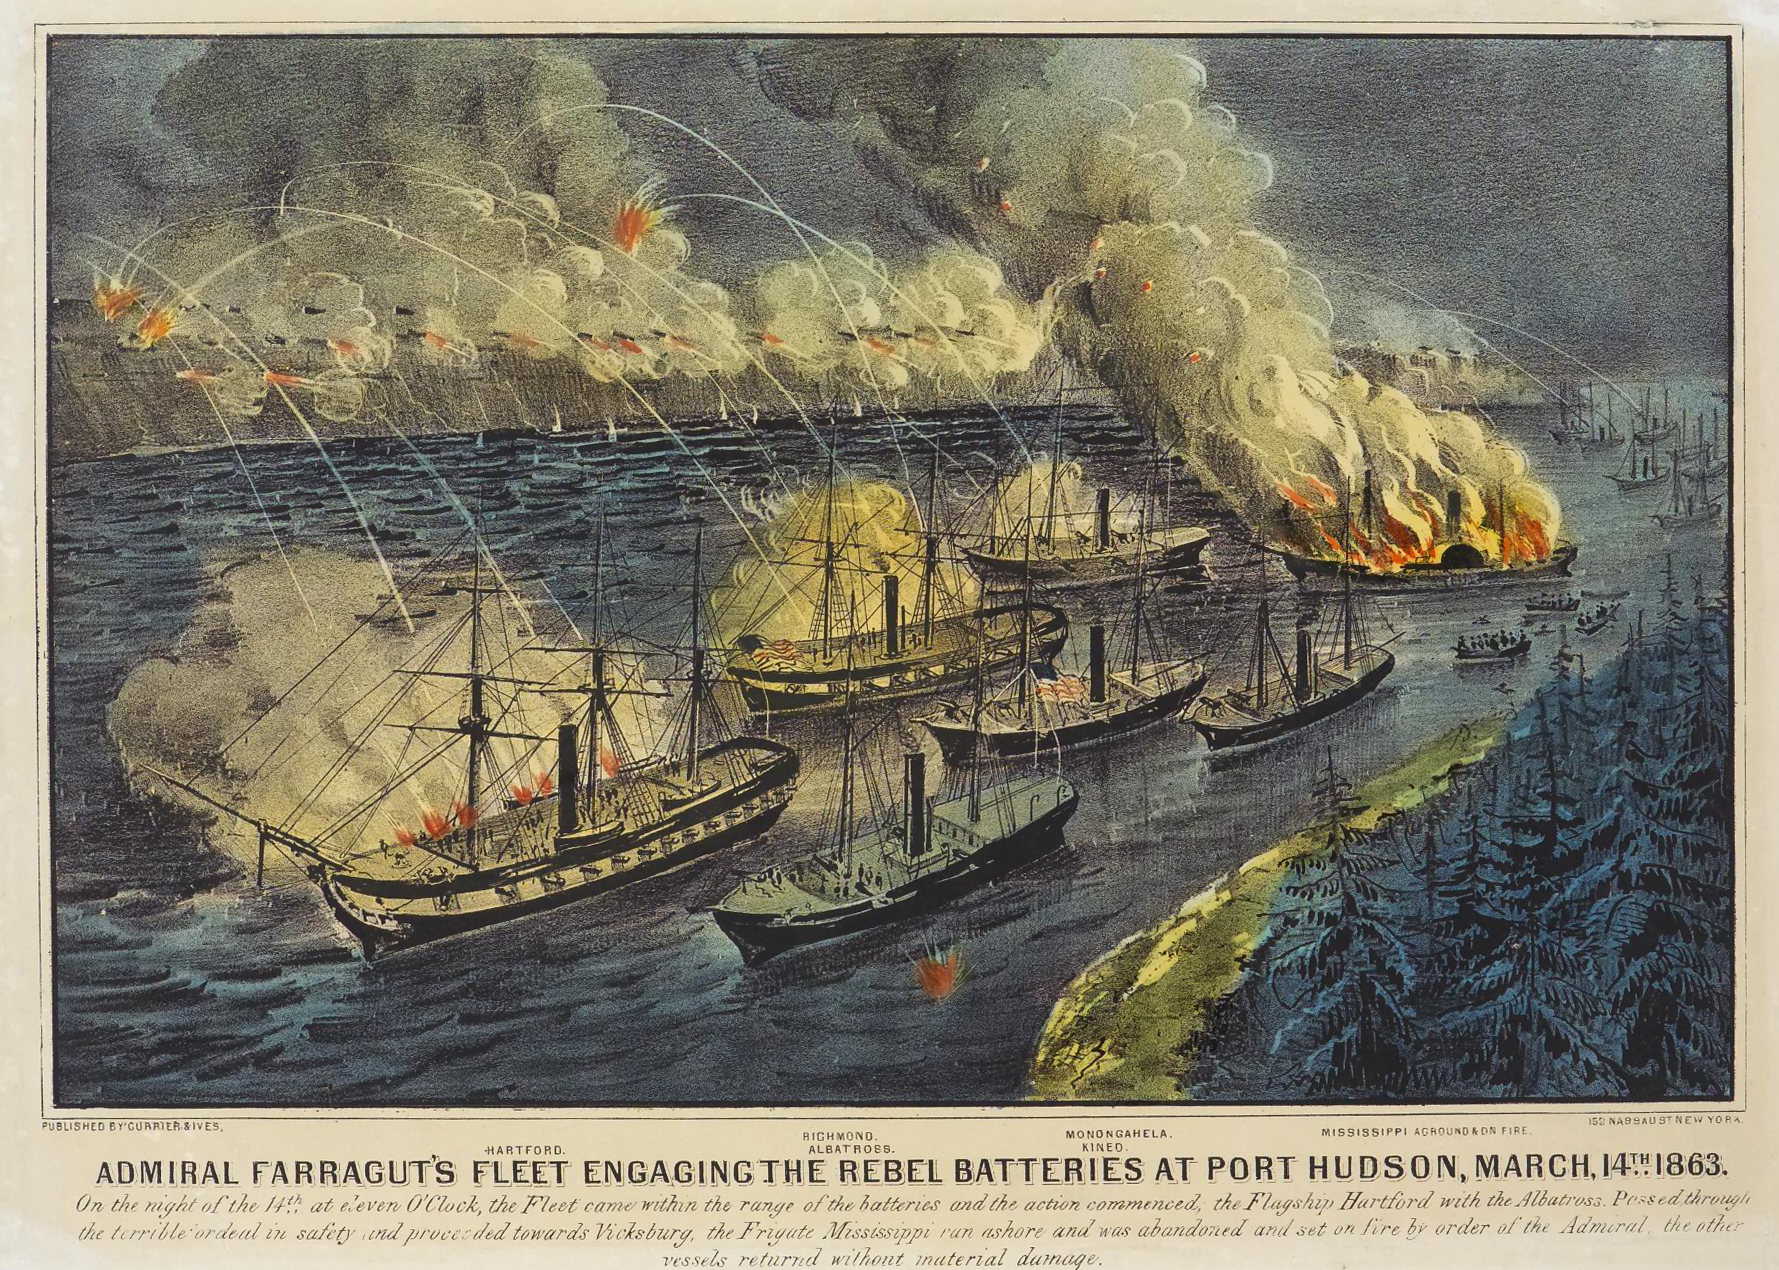 Admiral Farragut’s Fleet Engaging The Rebel Batteries At Port Hudson, March 14th 1863." Currier & Ives. Courtesy Springfield Museums, 2004.D03.200.